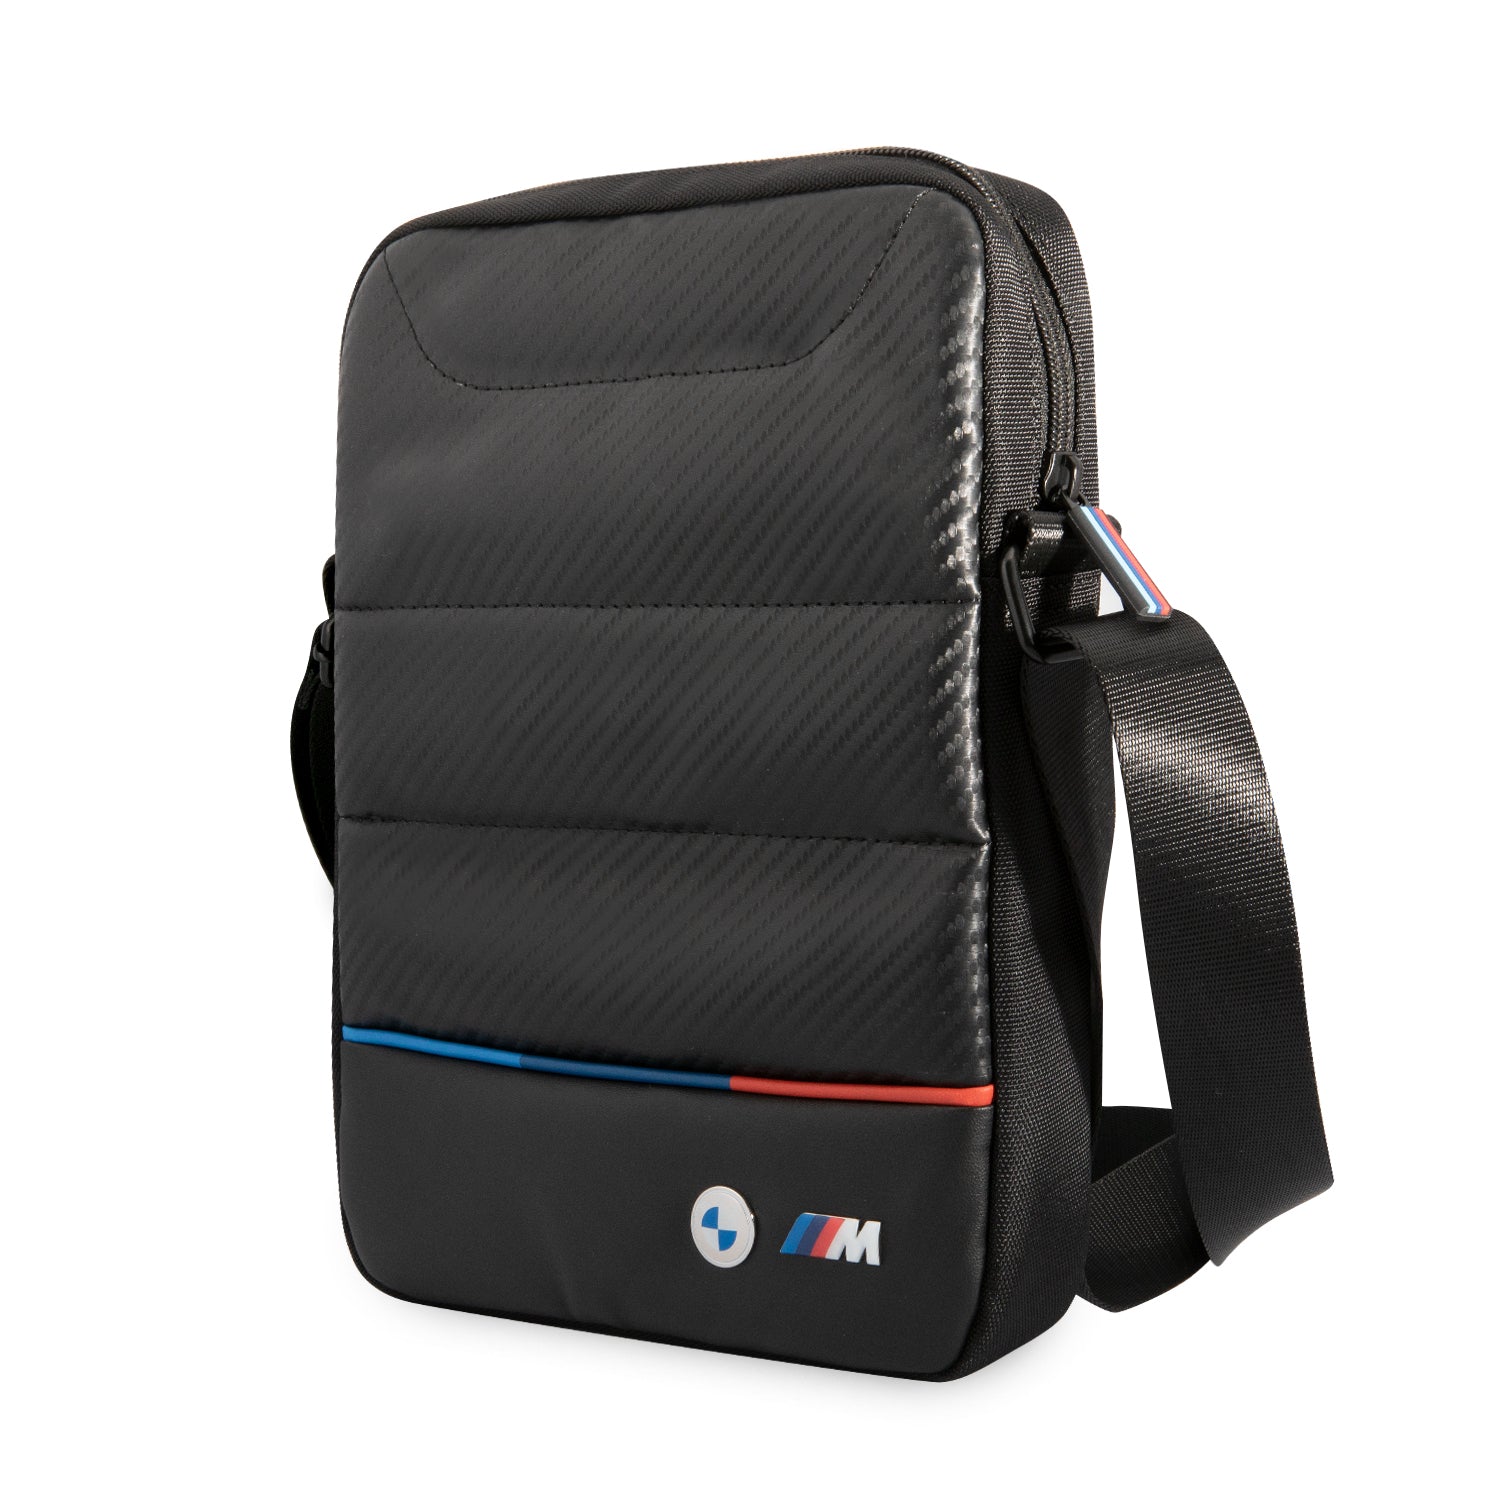 CG Mobile Mercedes-Benz Pattern III Tablet Bag 10, Officially Licensed,  High Quality Design, Easy f